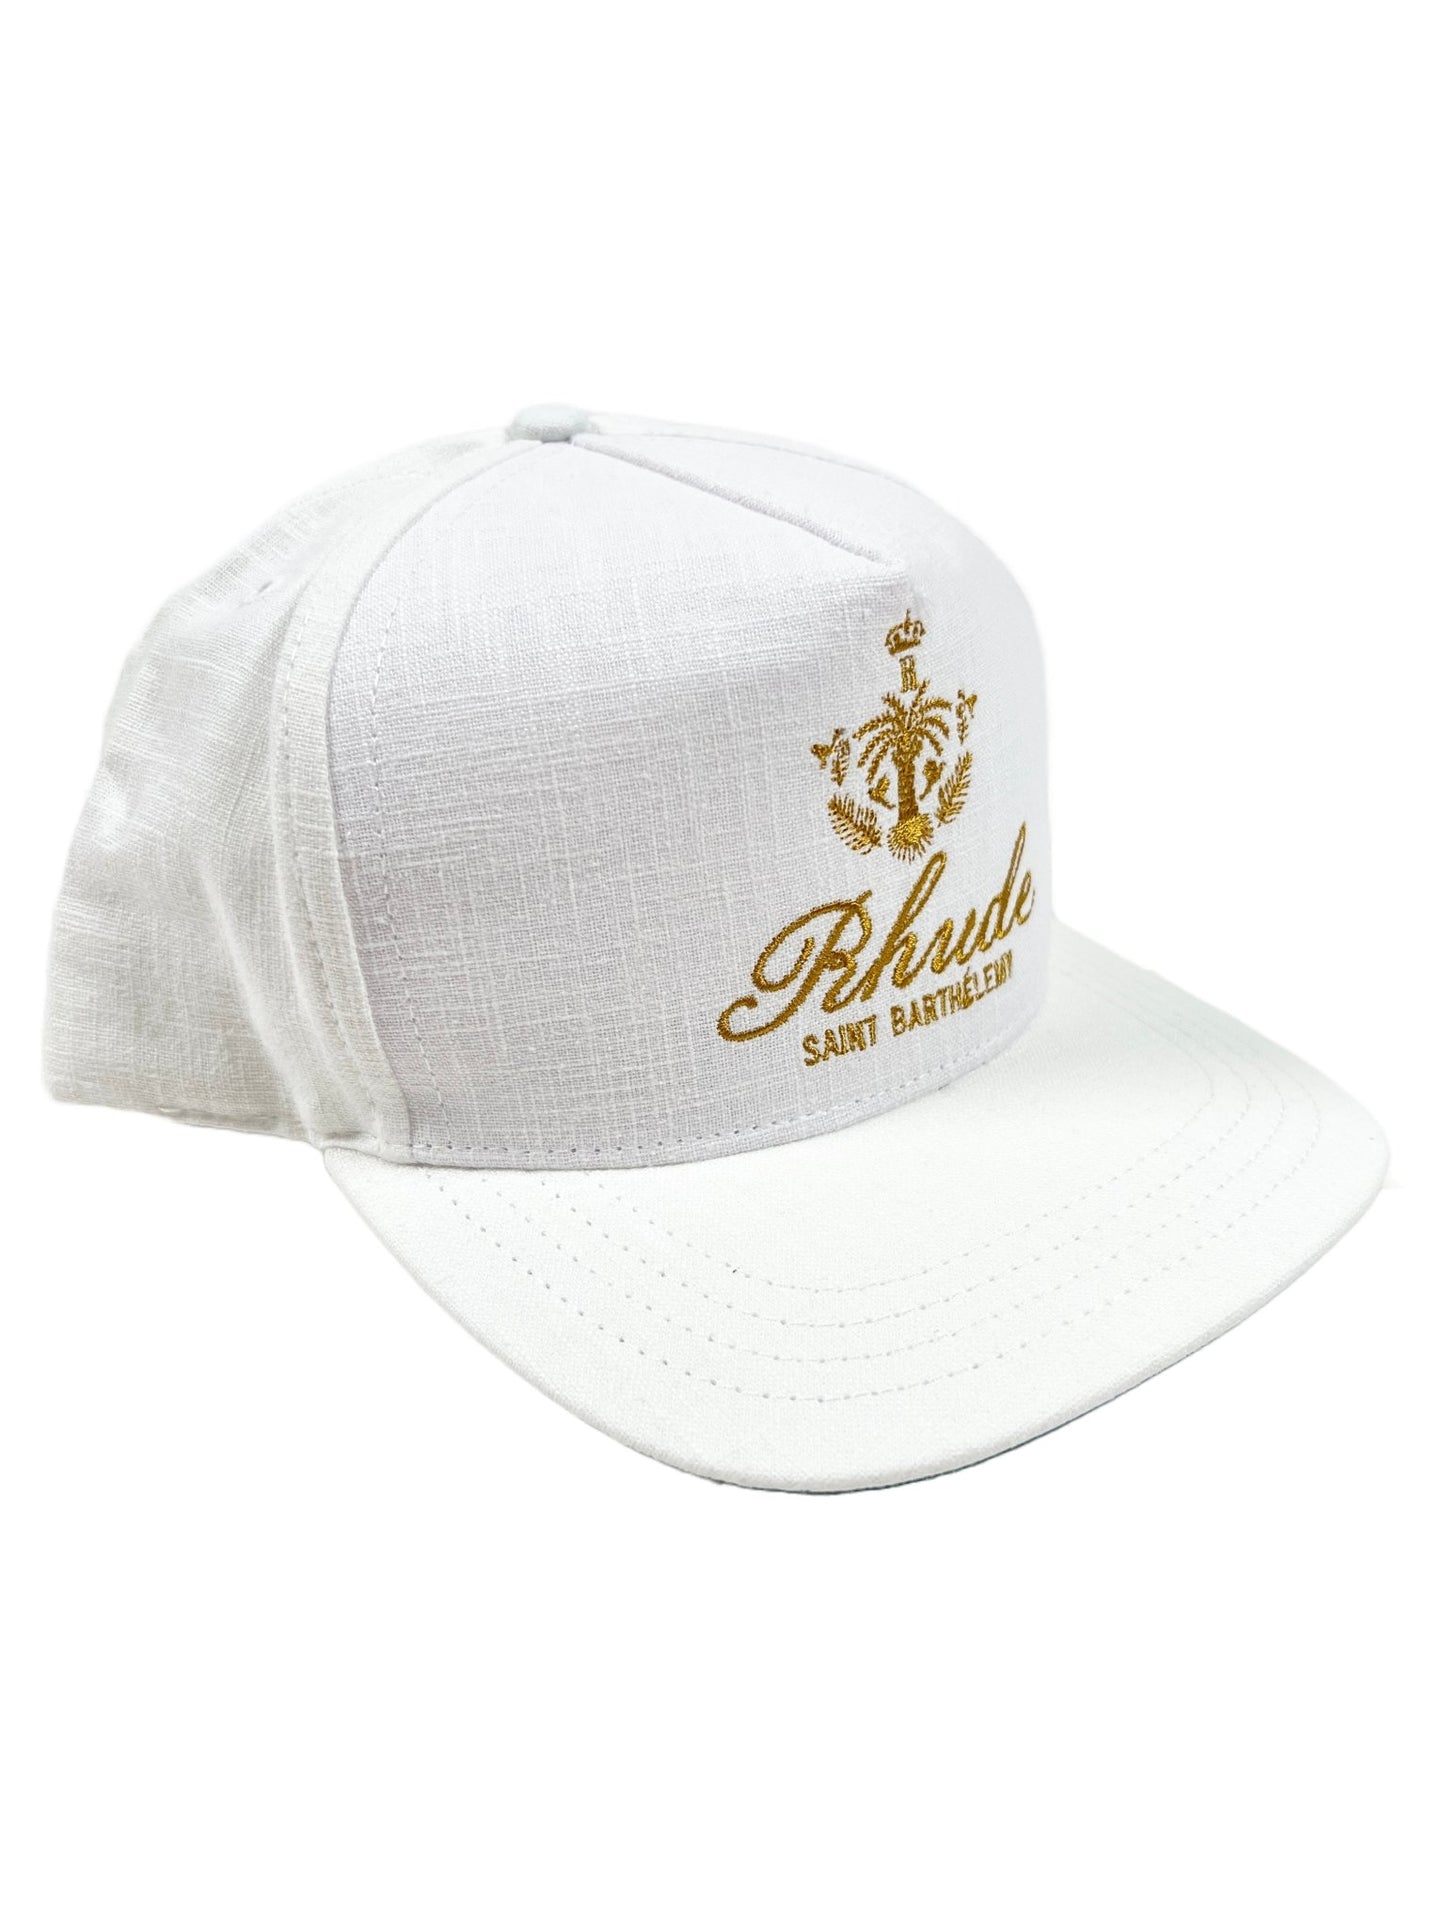 A white RHUDE ROSEWOOD HAT IVORY made of a polyester cotton blend with a gold logo on it.